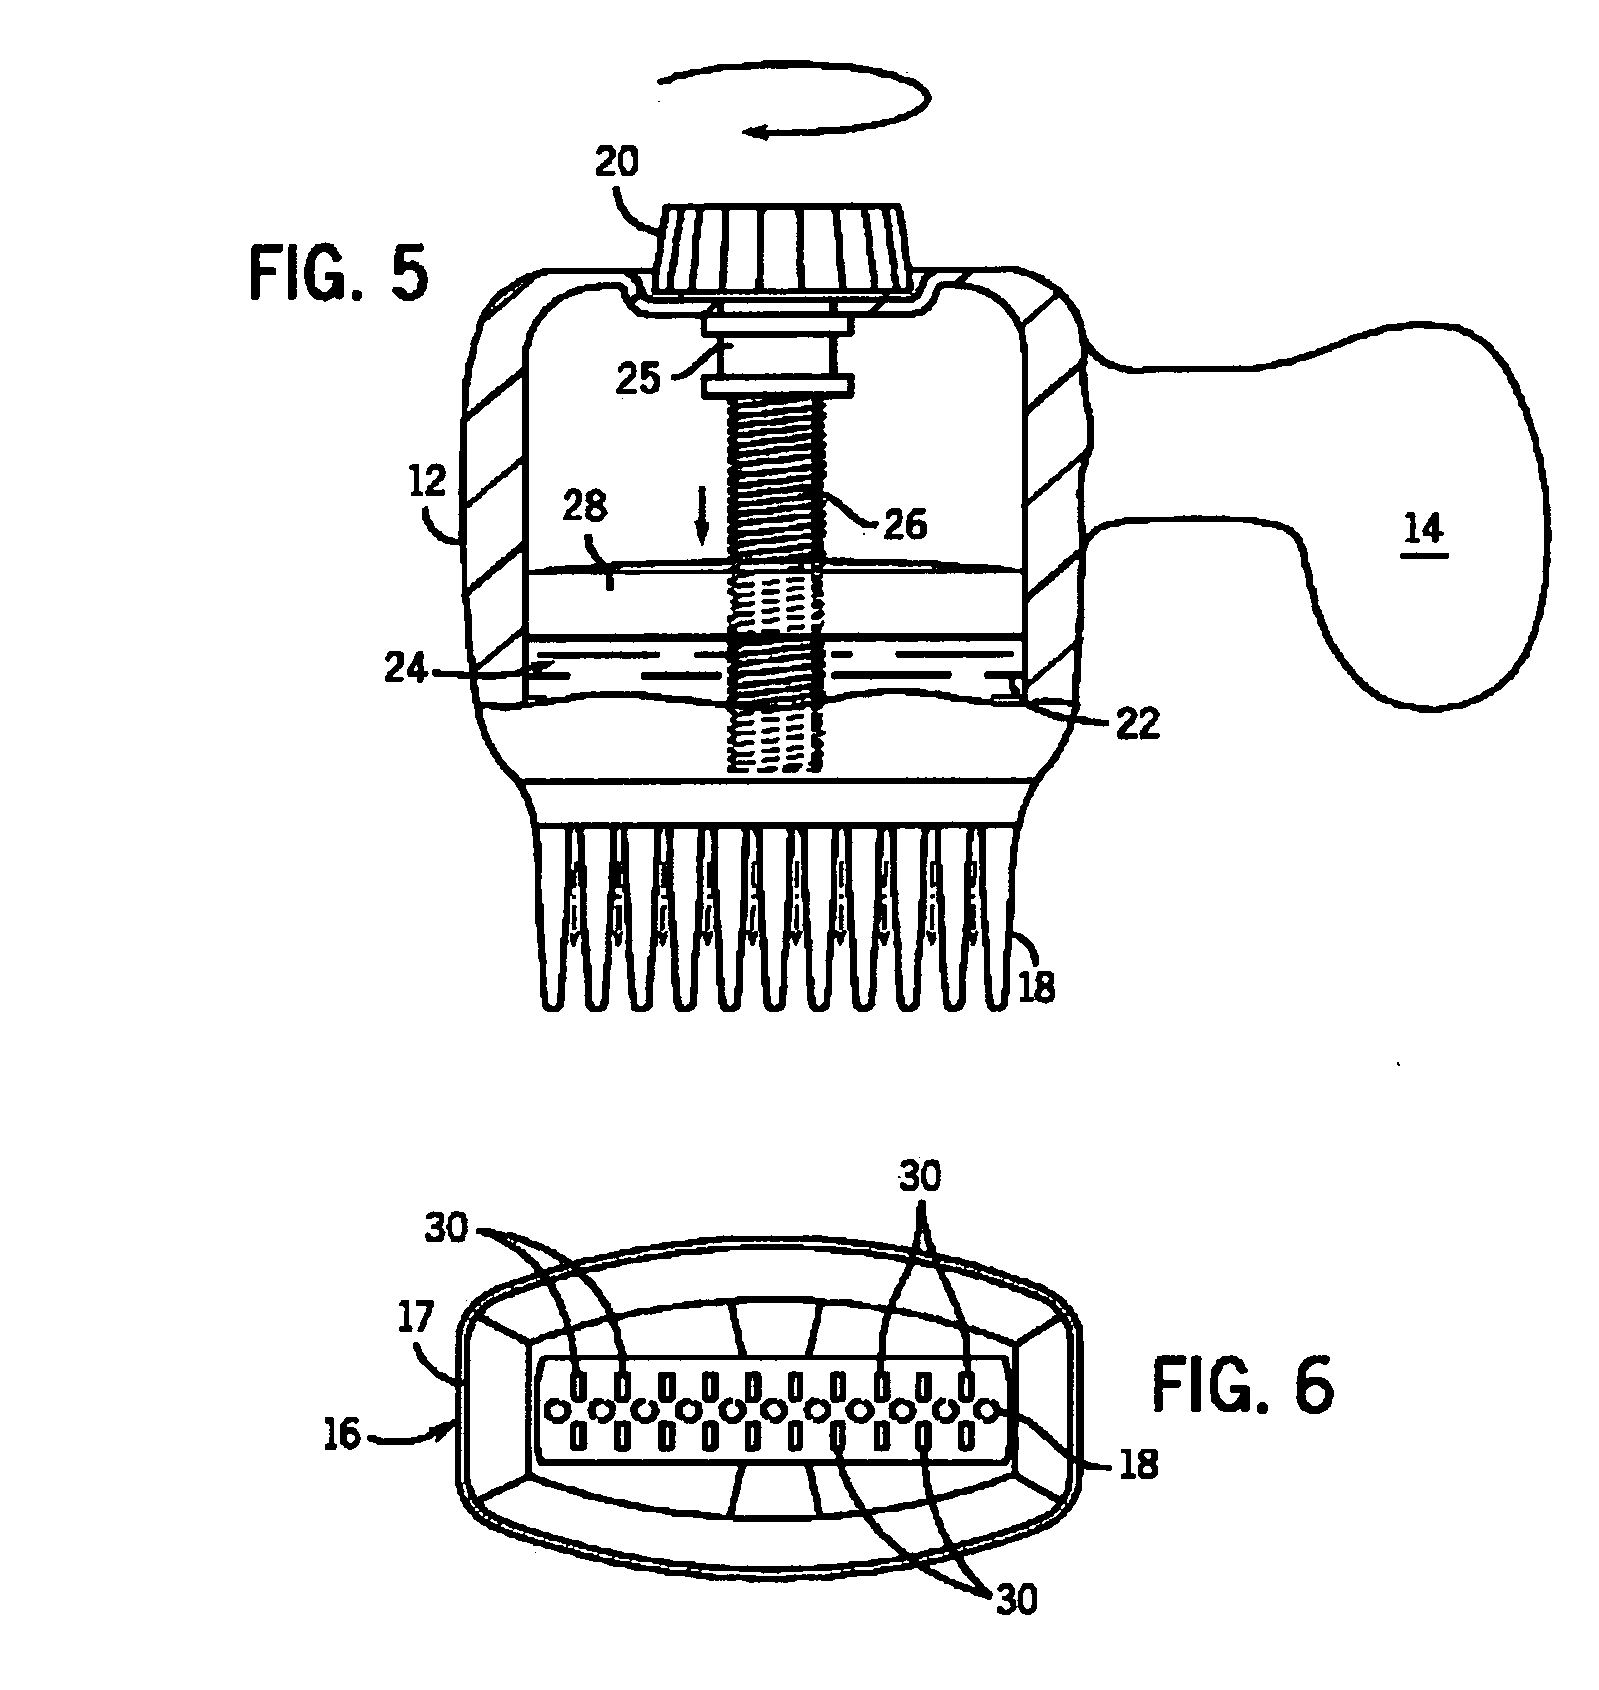 Hair treatment dispensing applicator and comb attachment